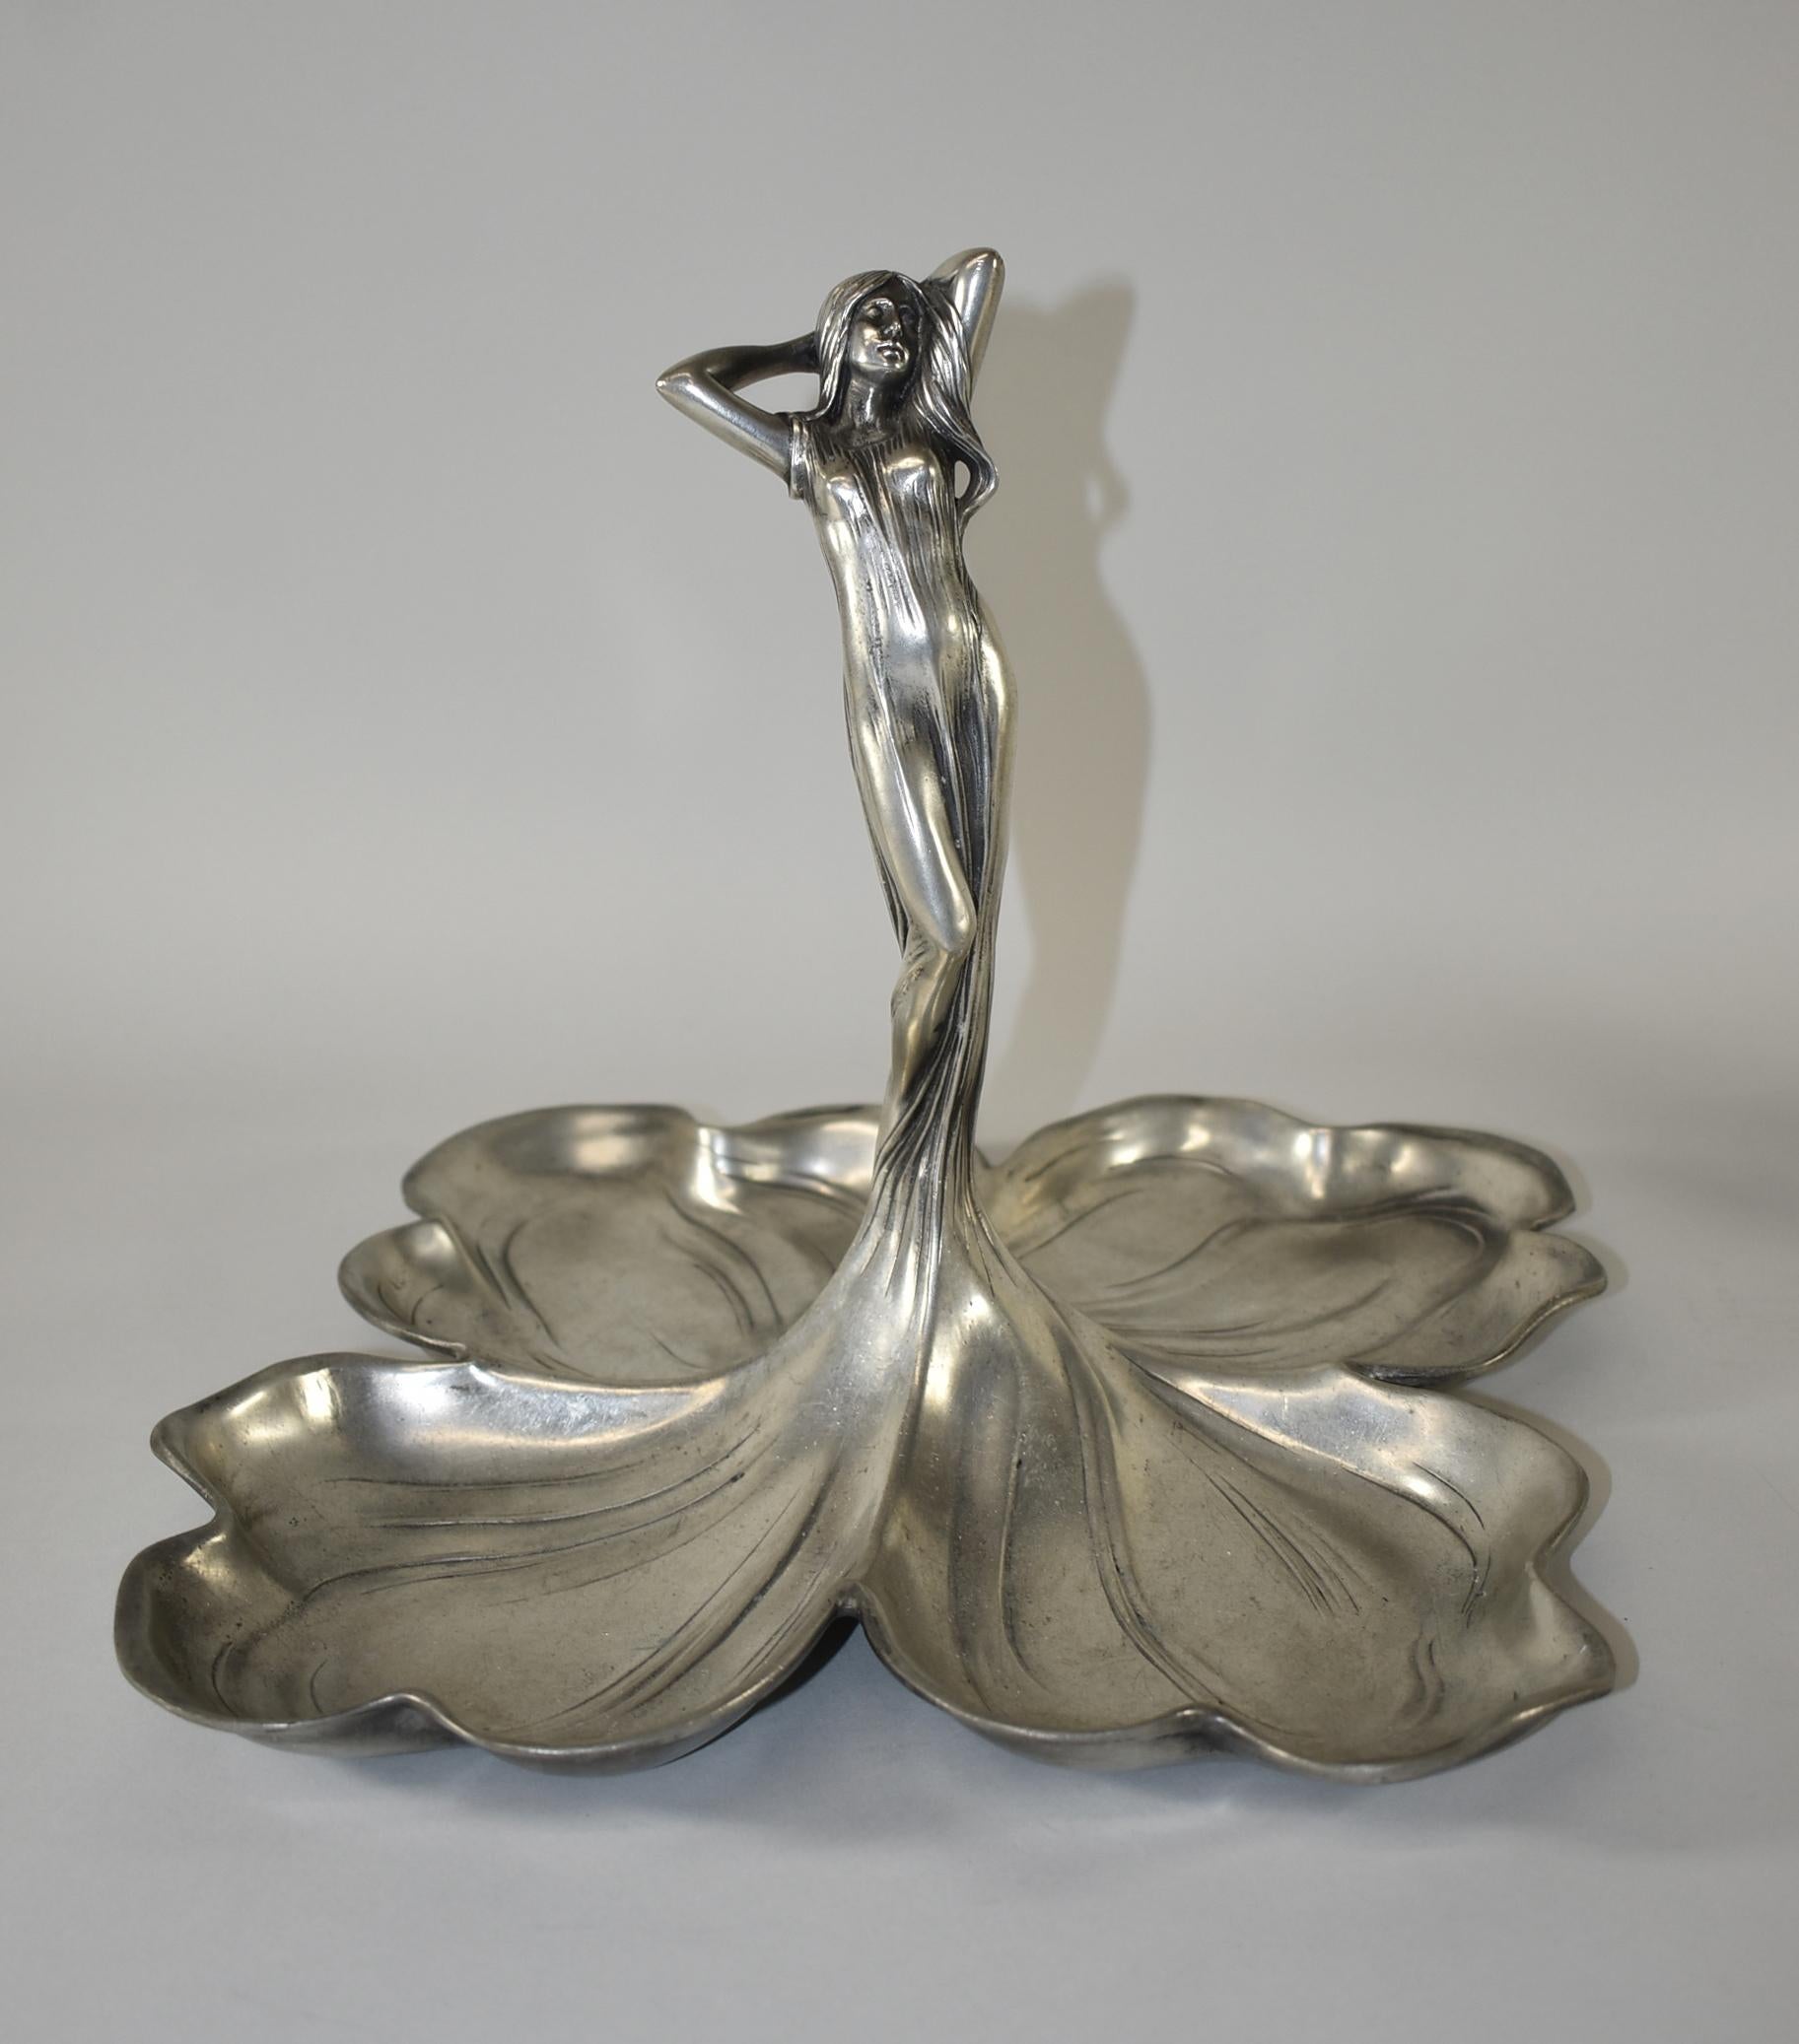 Art Nouveau pewter bowl / tray / fruit dish /centerpiece designed by Albert Mayer. It is an outstanding masterpiece with a figural young beauty with long flowing hair and dress that transforms into a quadruple leaf dish. The centerpiece quadruple